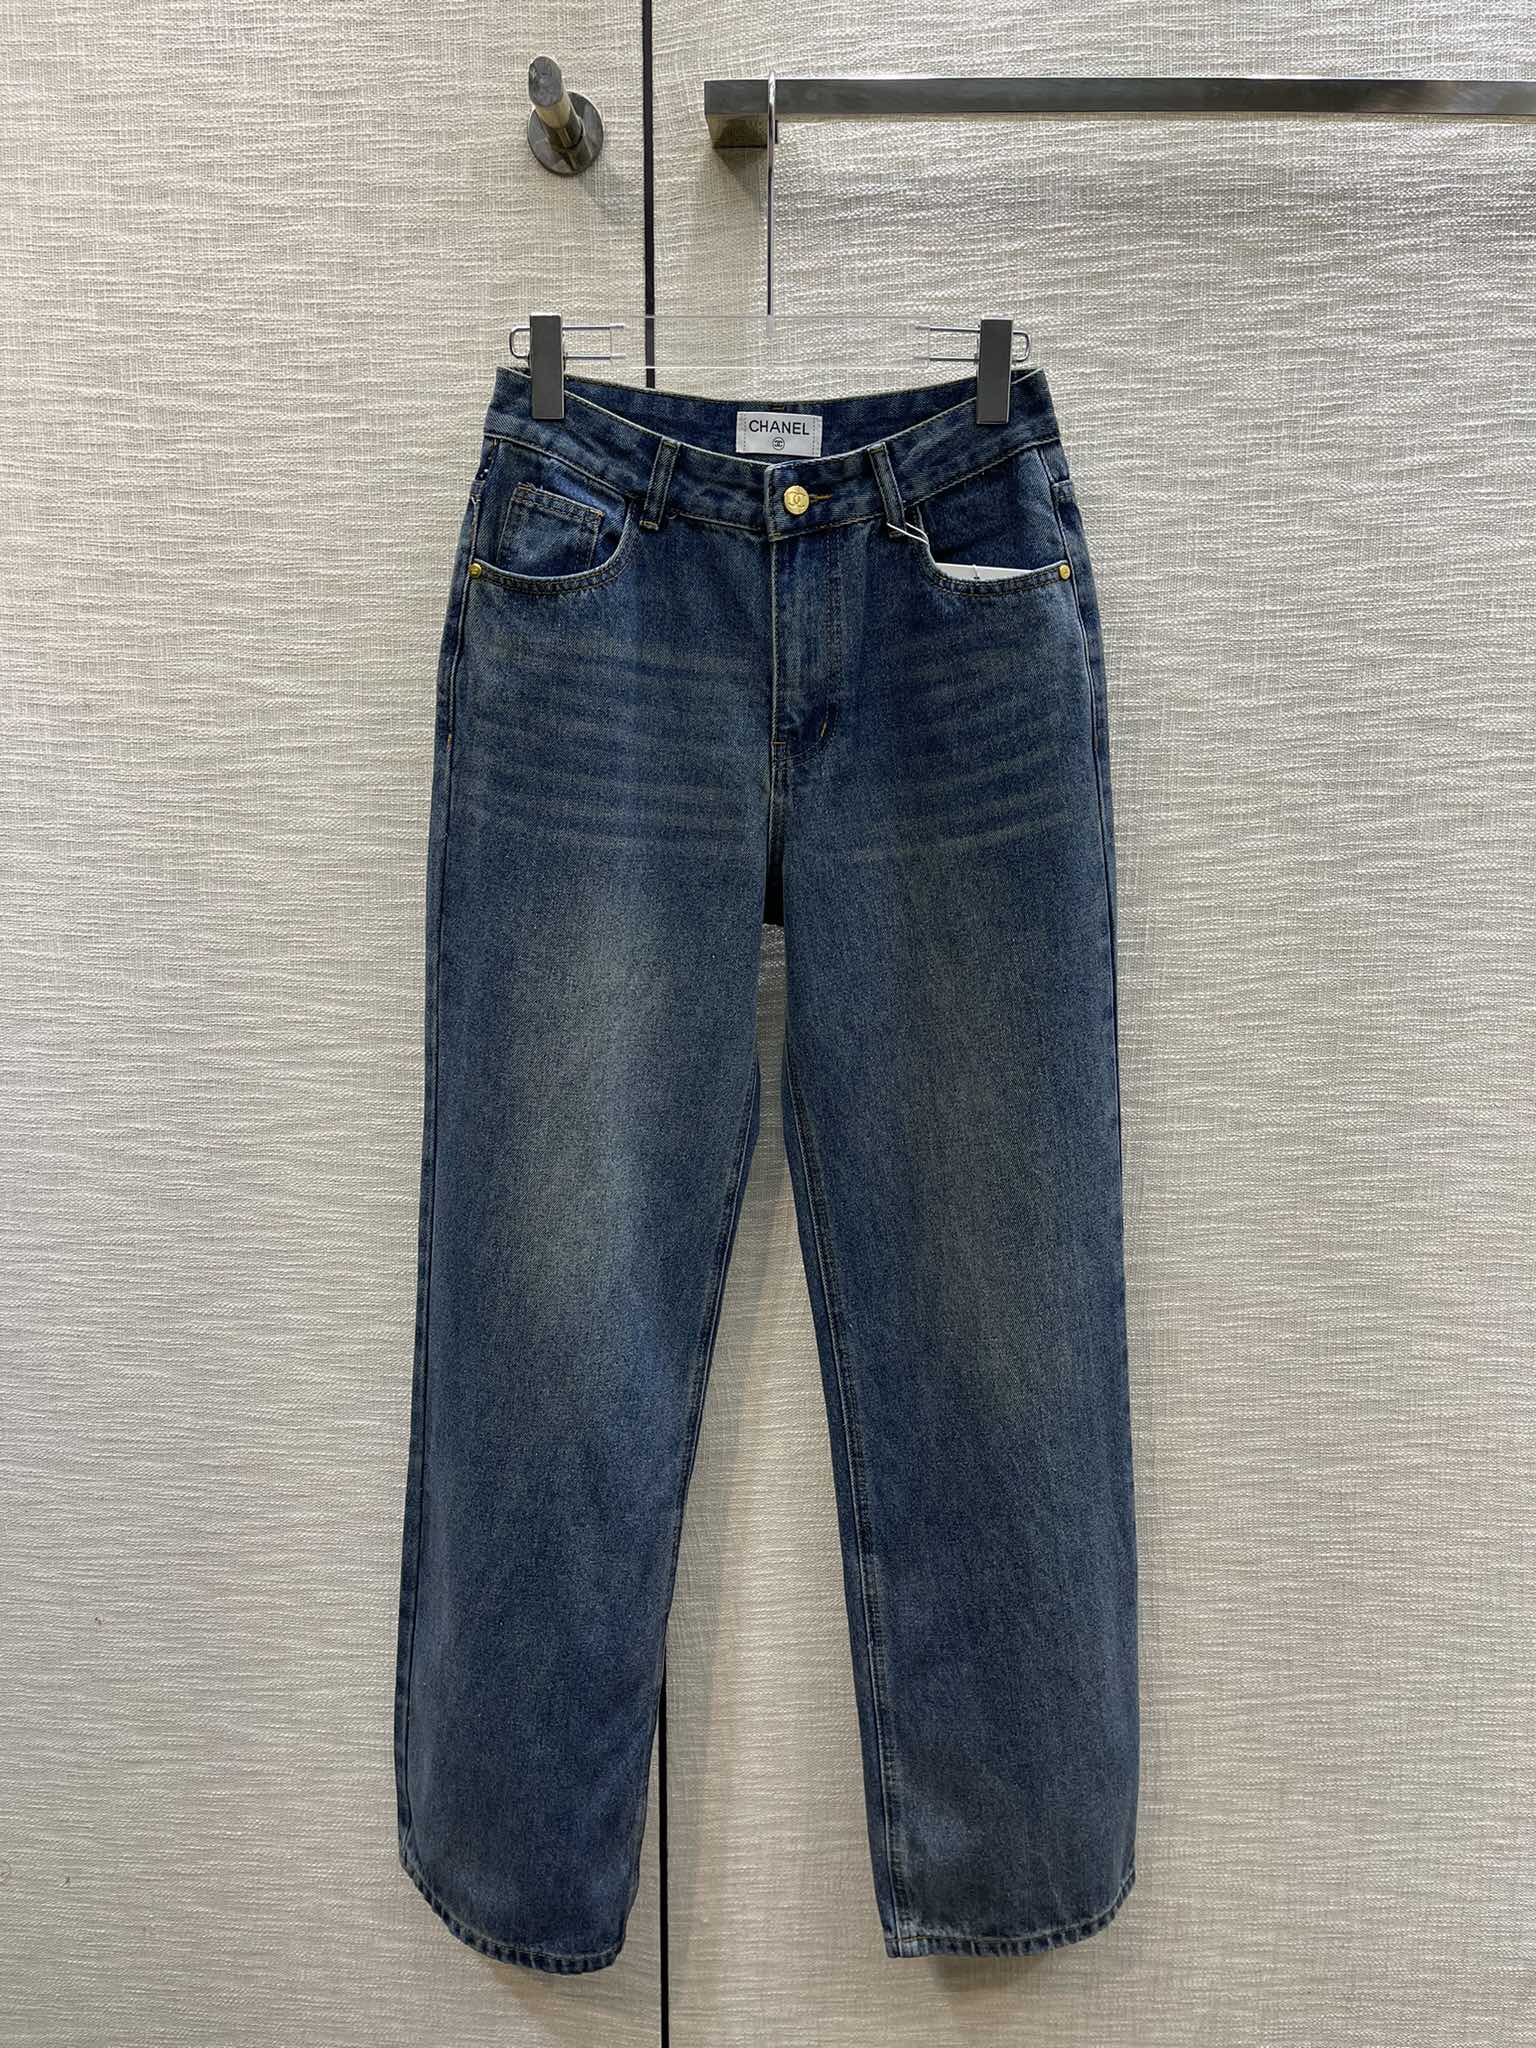 Chanel Clothing Jeans High Quality 1:1 Replica
 Black Blue Cotton Denim Spring Collection Wide Leg